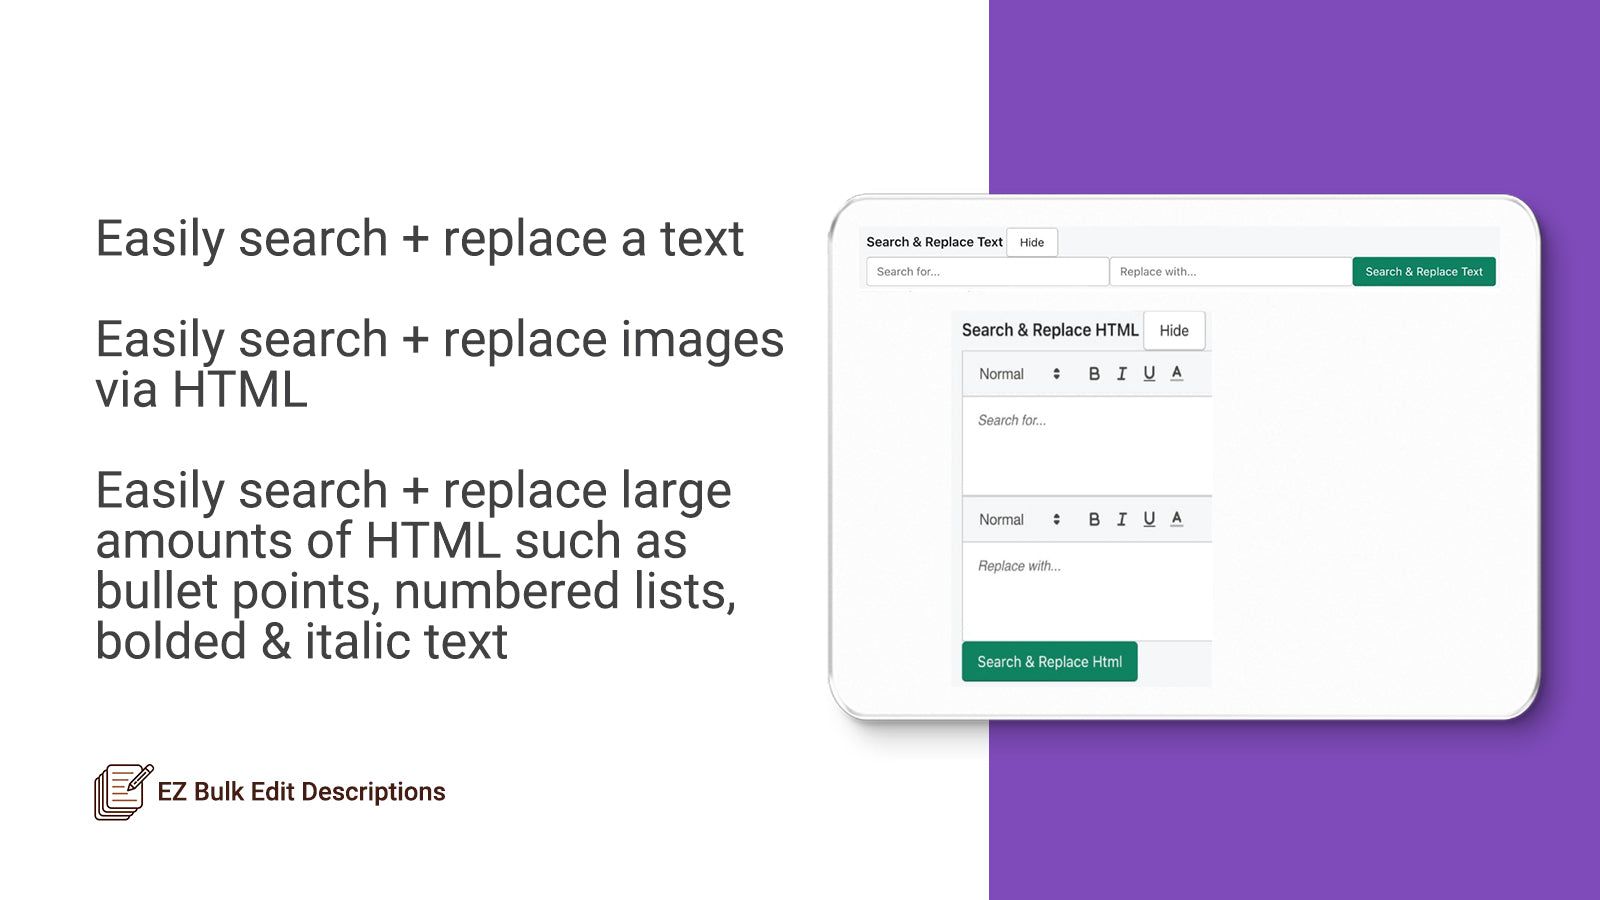 Easily search and replace text, HTML, images, bullet points, etc